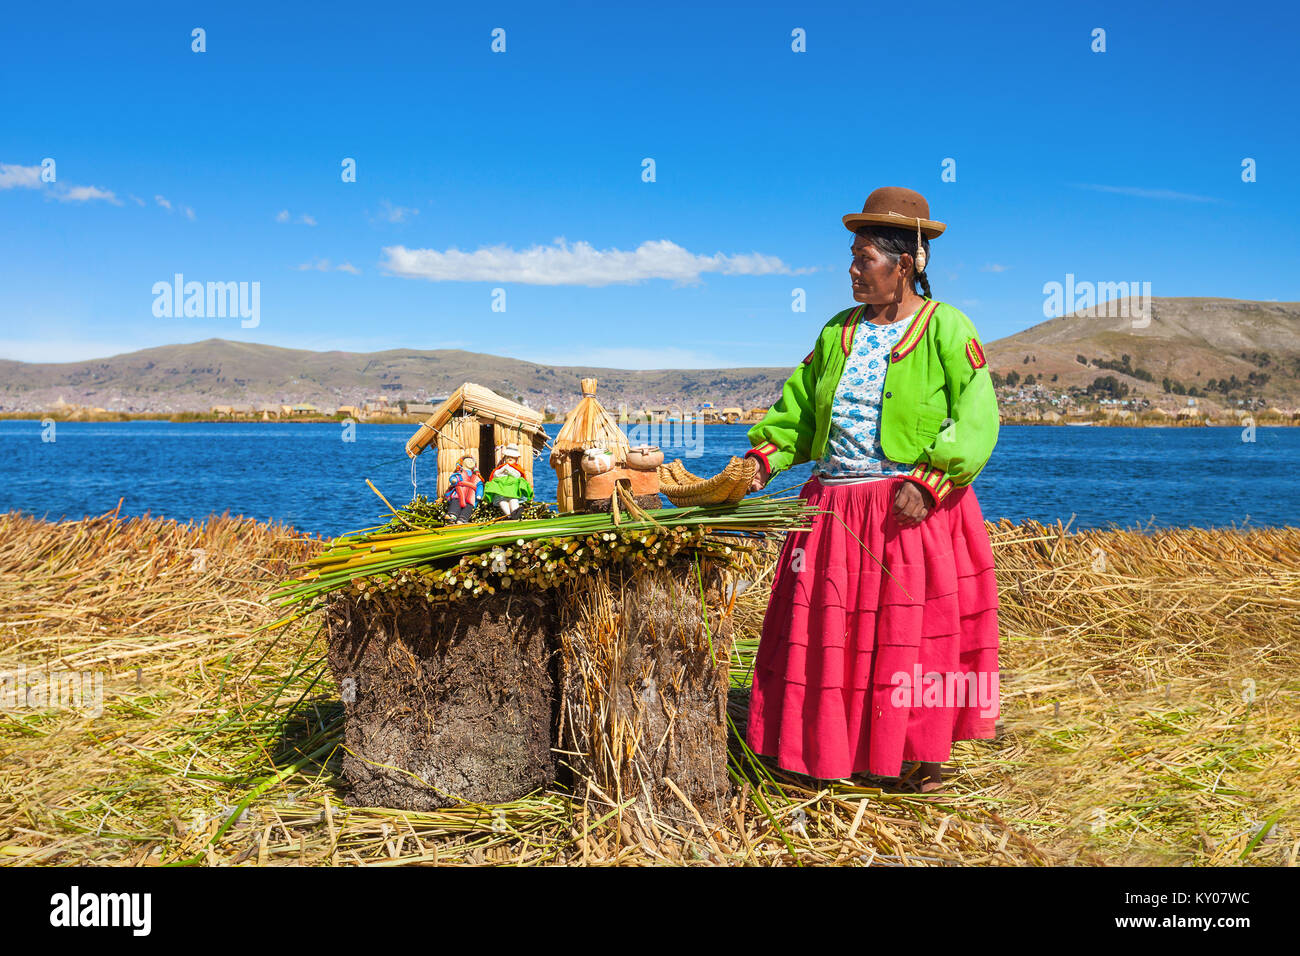 PUNO, PERU - MAY 14, 2015: Unidentified woman in traditional dress showing handicrafts in Uros Island. Stock Photo